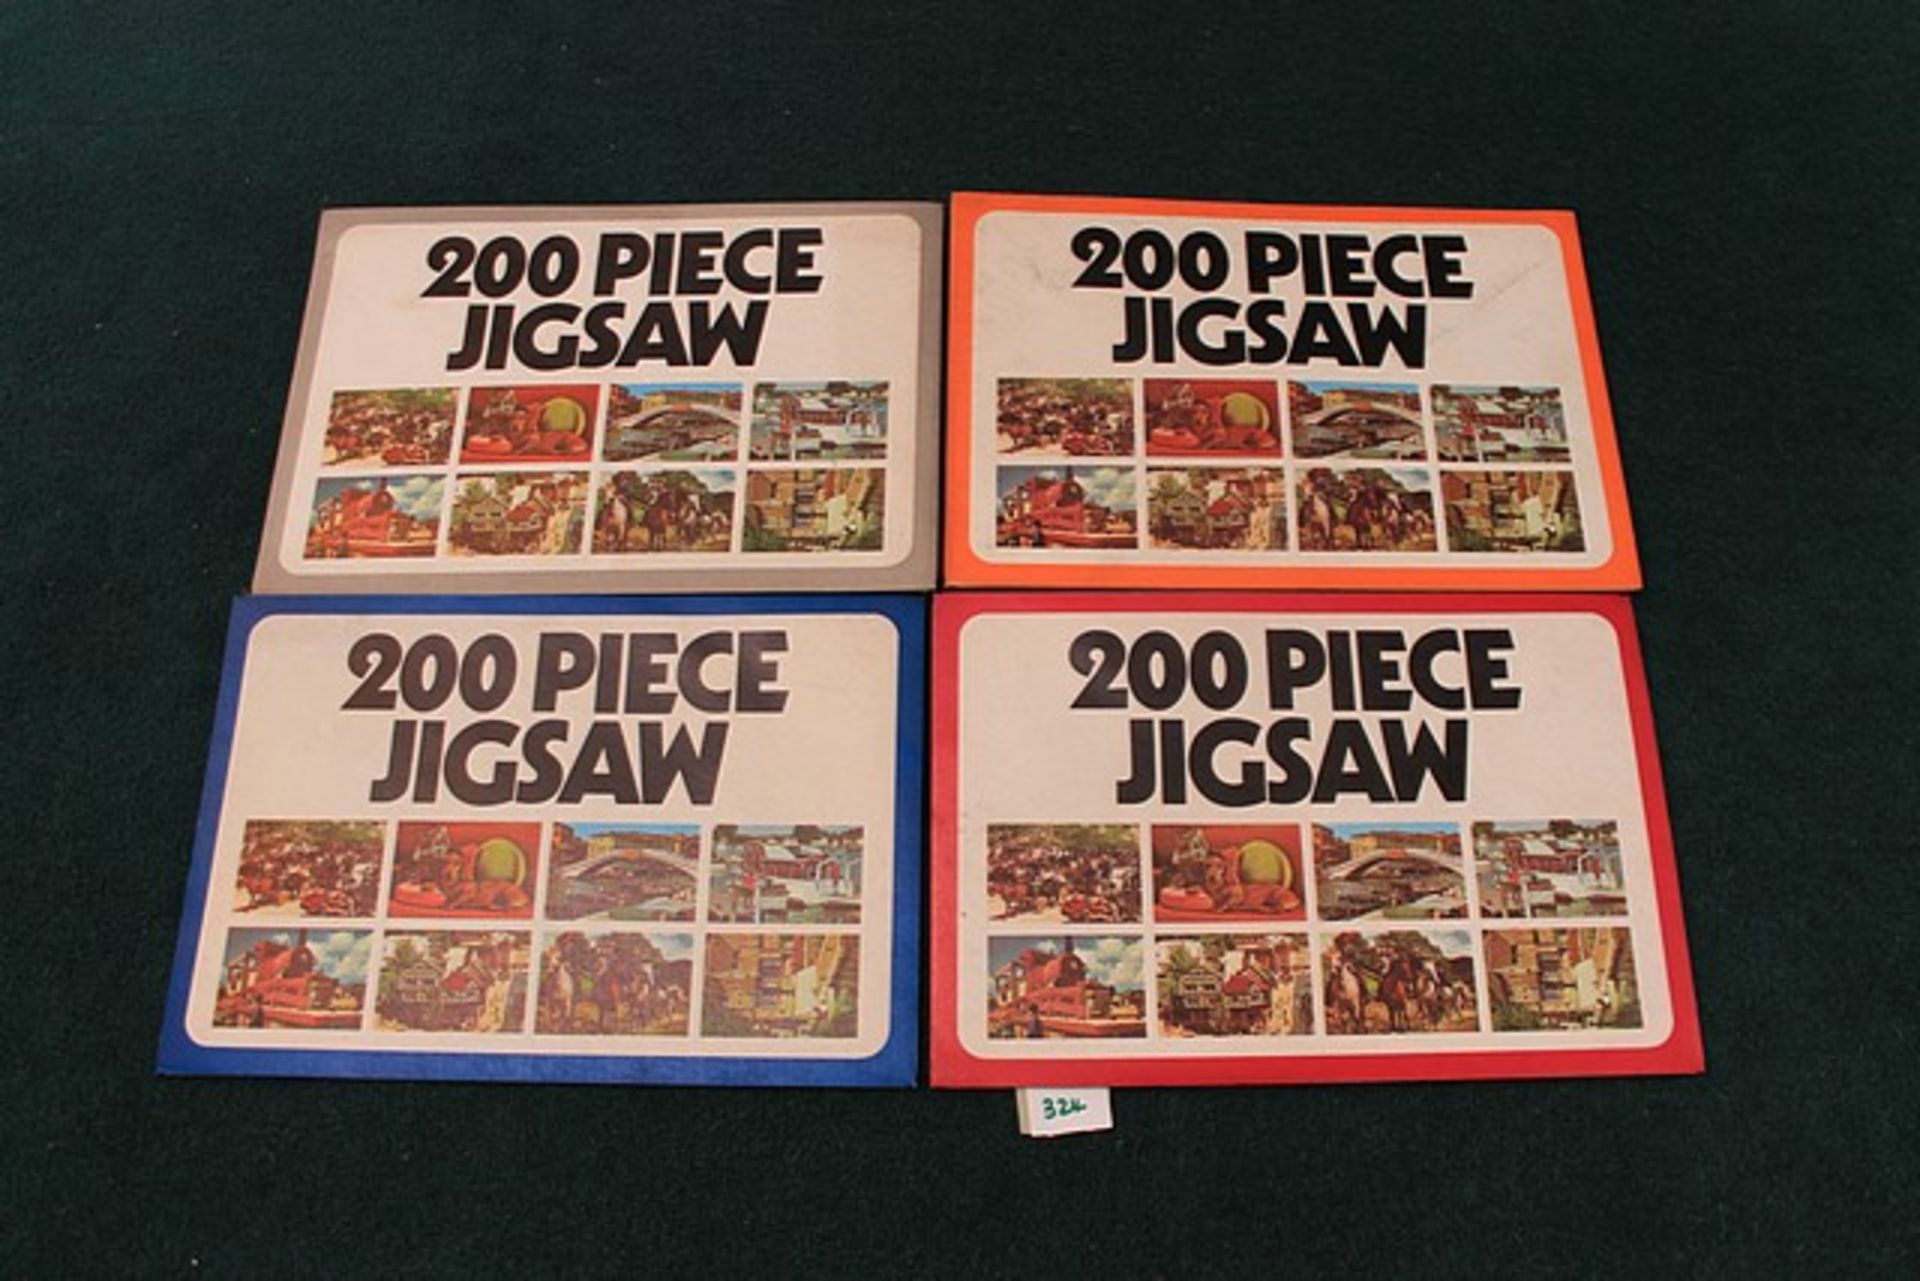 4 x 200 Piece Jigsaw Puzzles In The Orignal Envelopes